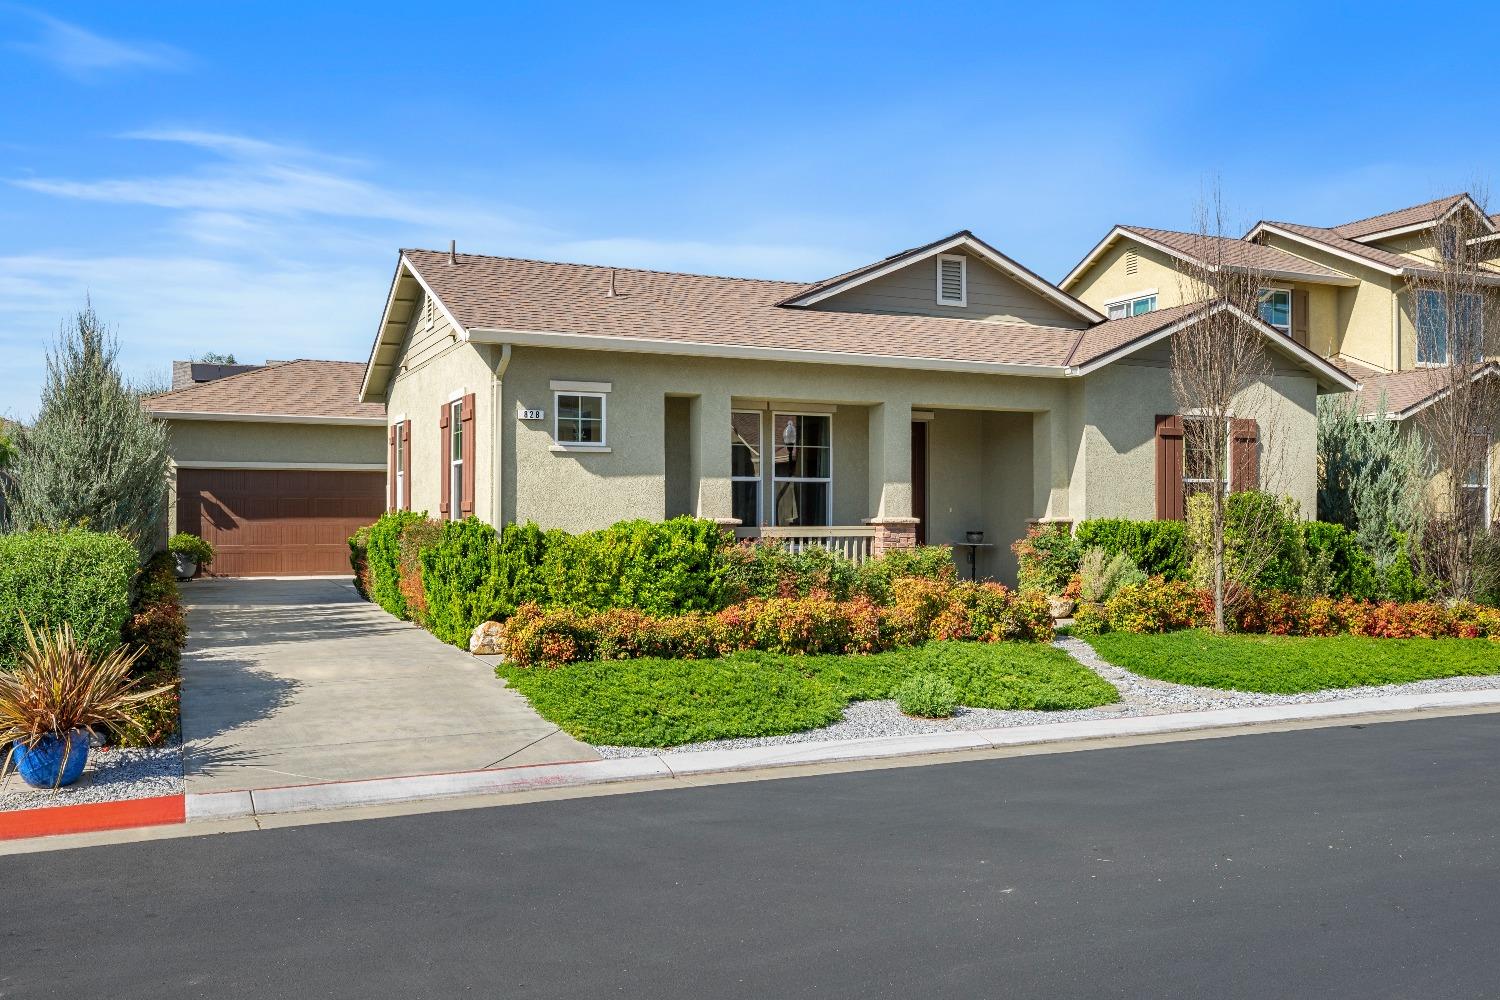 Photo of 828 River Pointe Cir in Oakdale, CA